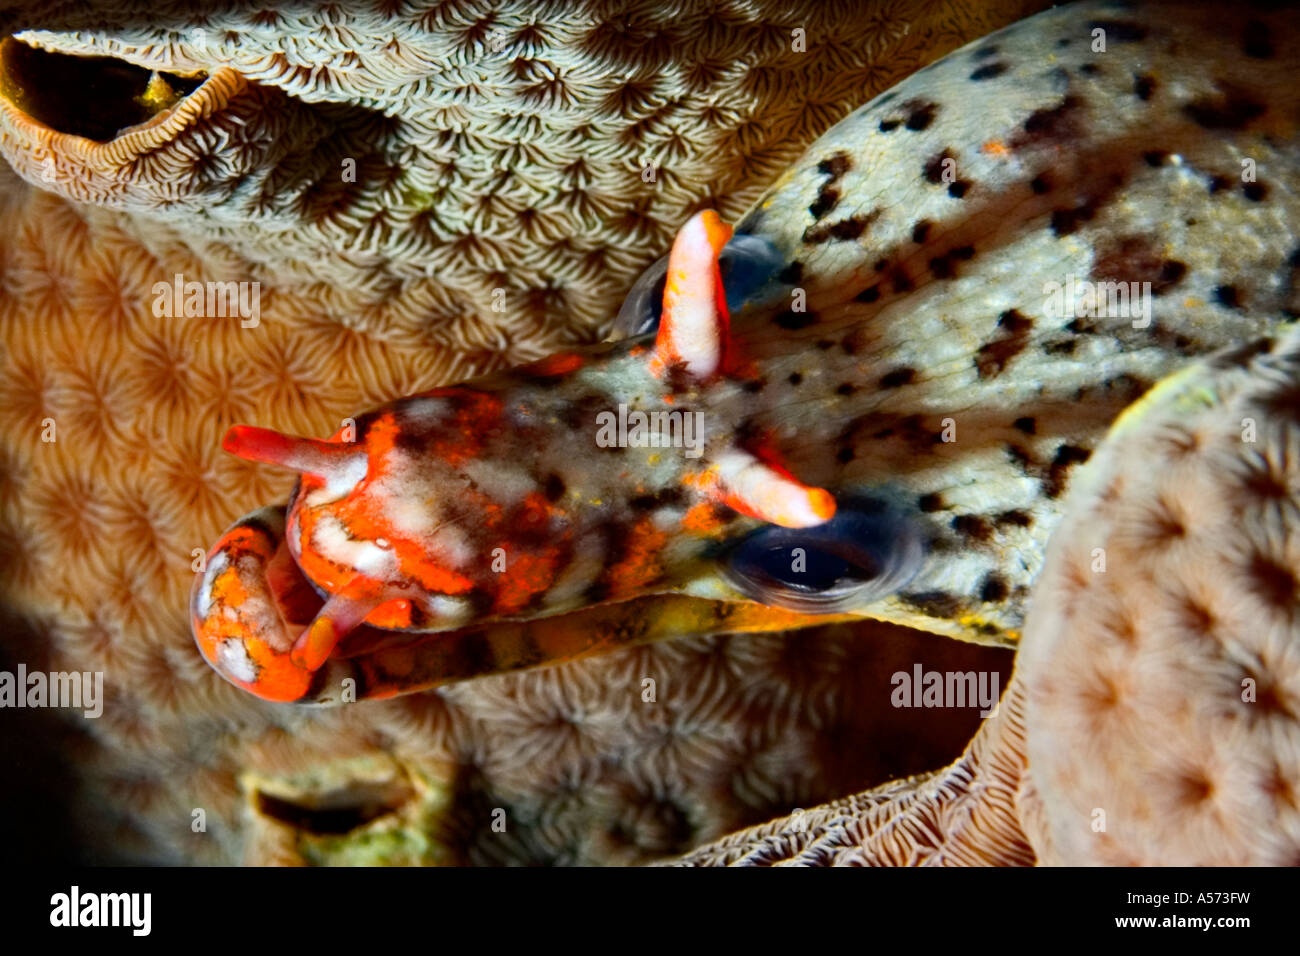 Tigermuraene Scuticaria Tigrina Tiger Reef uropterygiinae actinopterygii ray anguille anguille anguille poissons à tigre tigre tigermoray m Banque D'Images